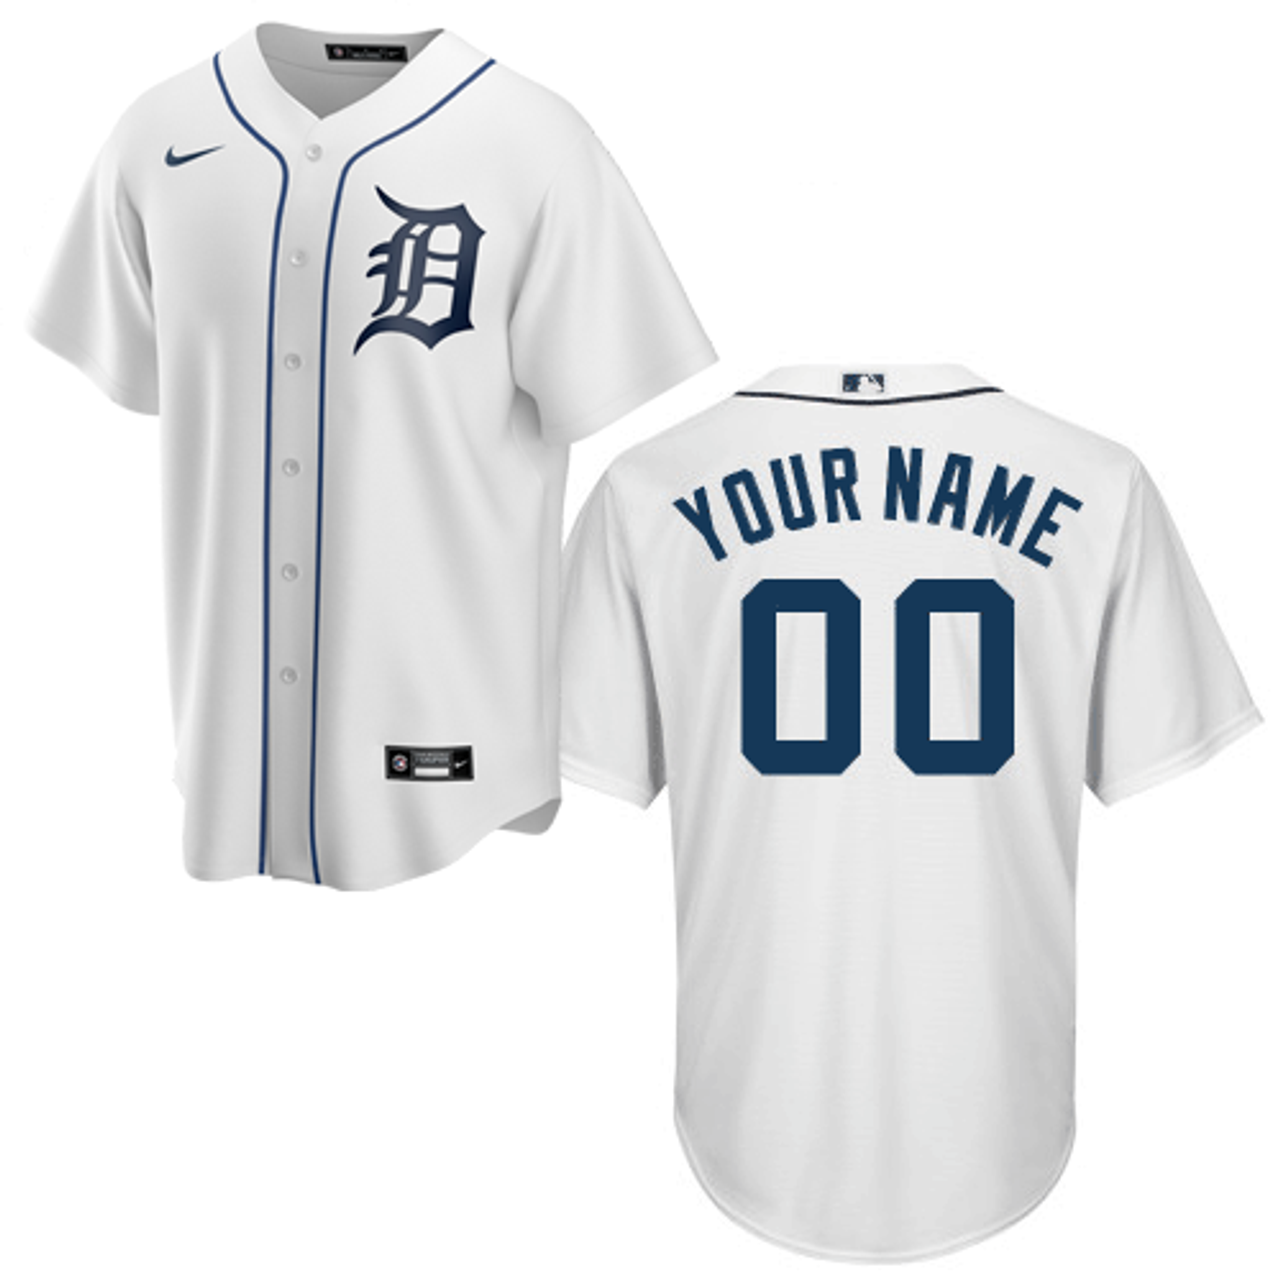 2014 Detroit Tigers Team Signed Home Jersey (MLB AUTHENTICATED)